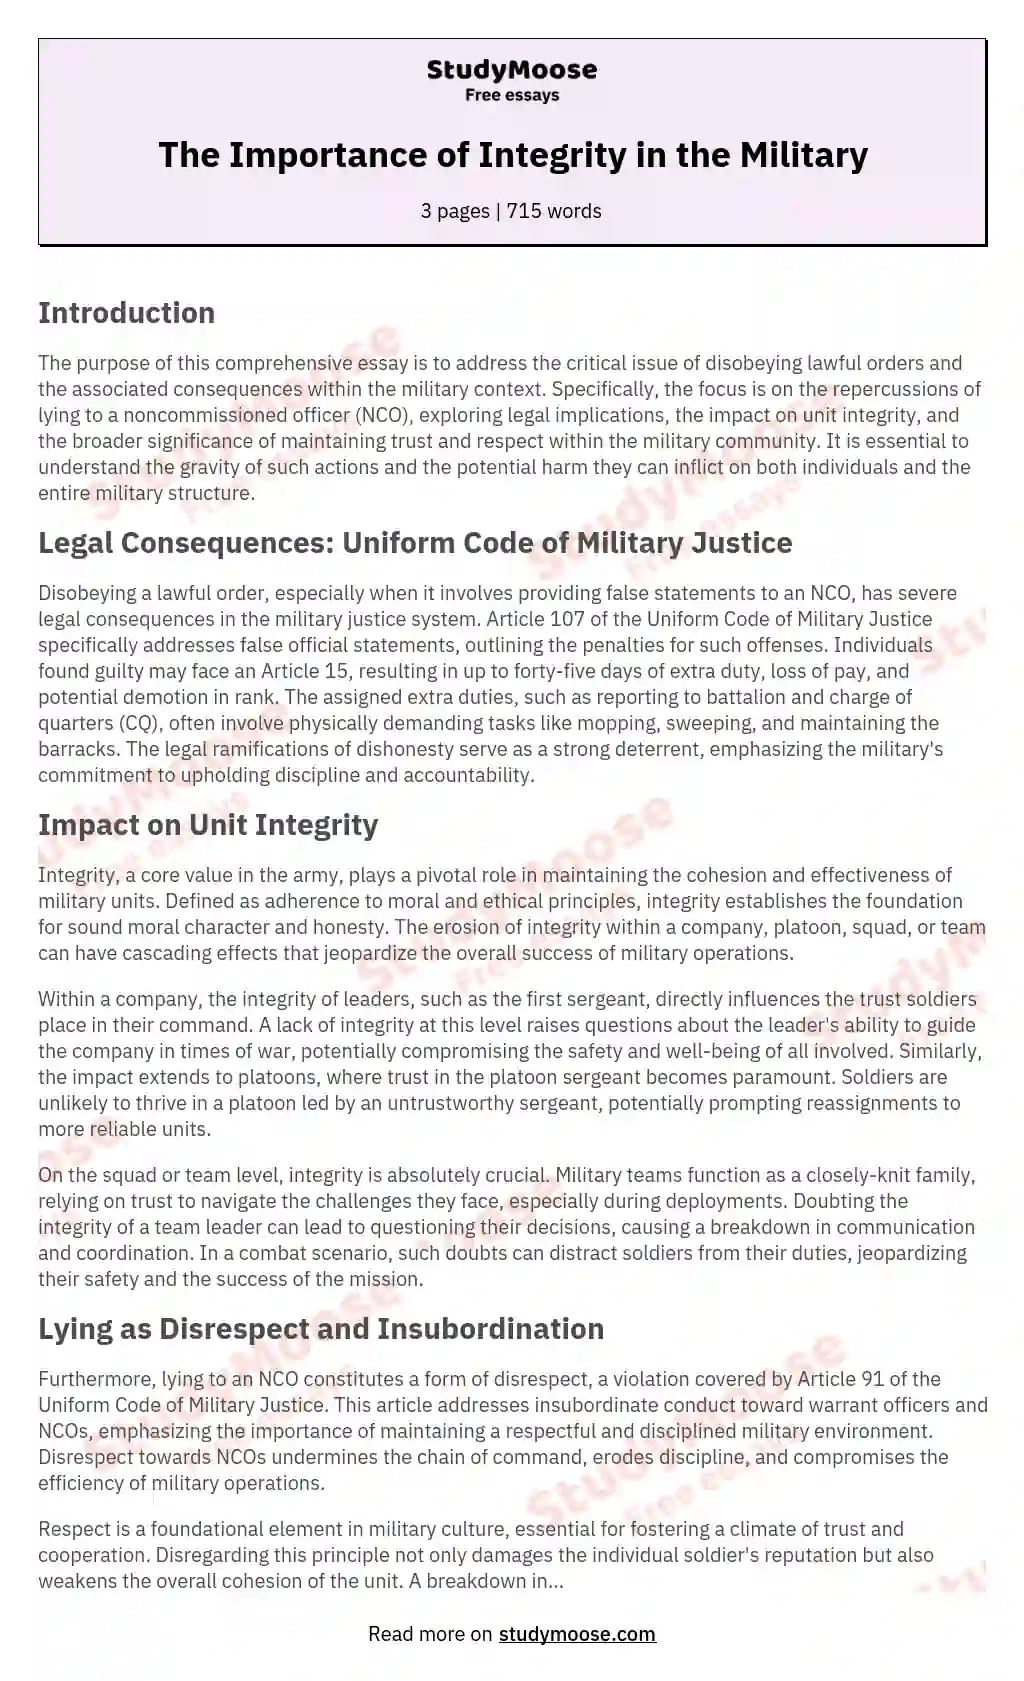 The Importance of Integrity in the Military essay